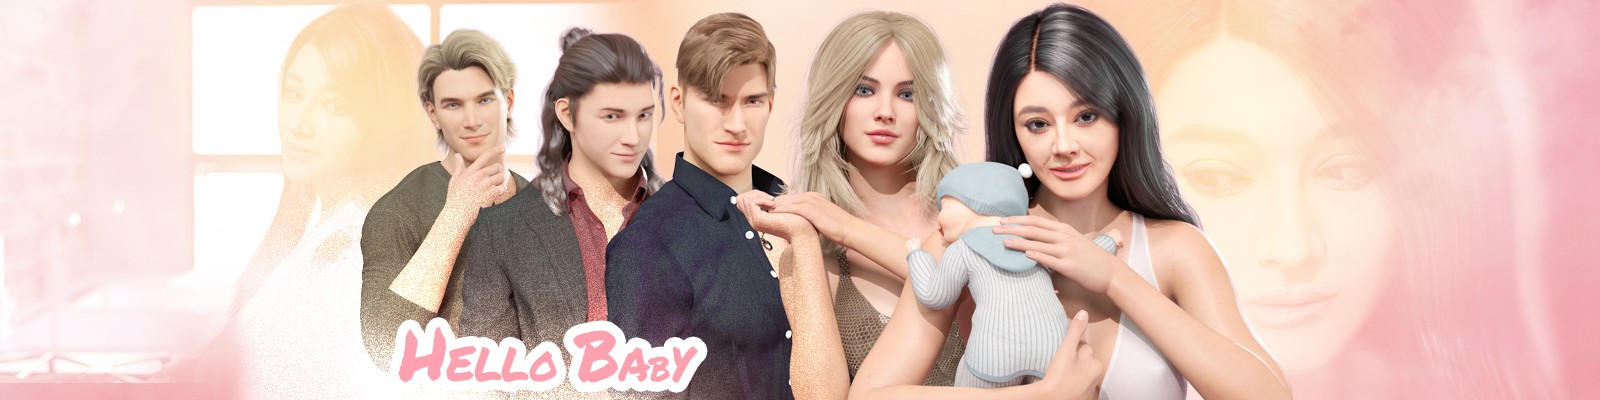 Hello Baby Adult Game Android Apk Download